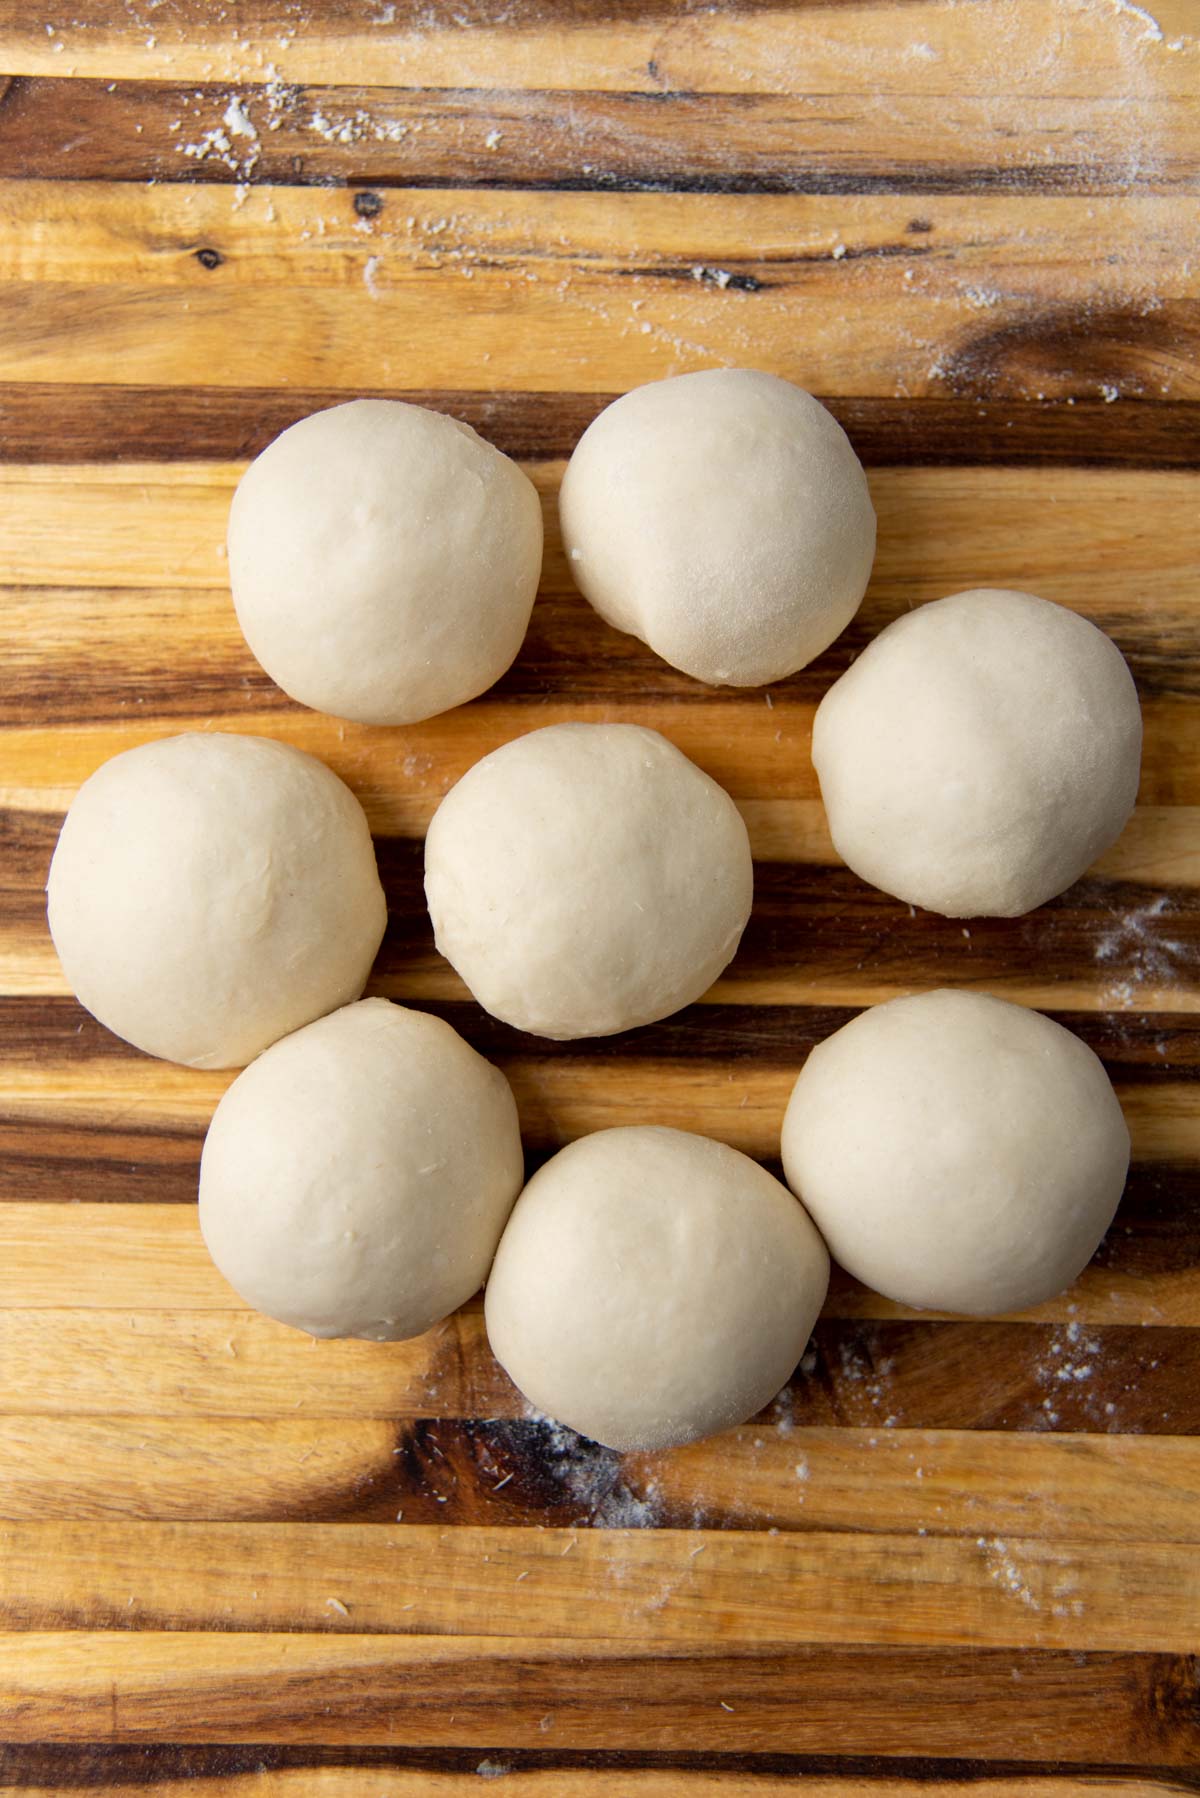 8 smaller portions formed into smooth balls on a wooden board.